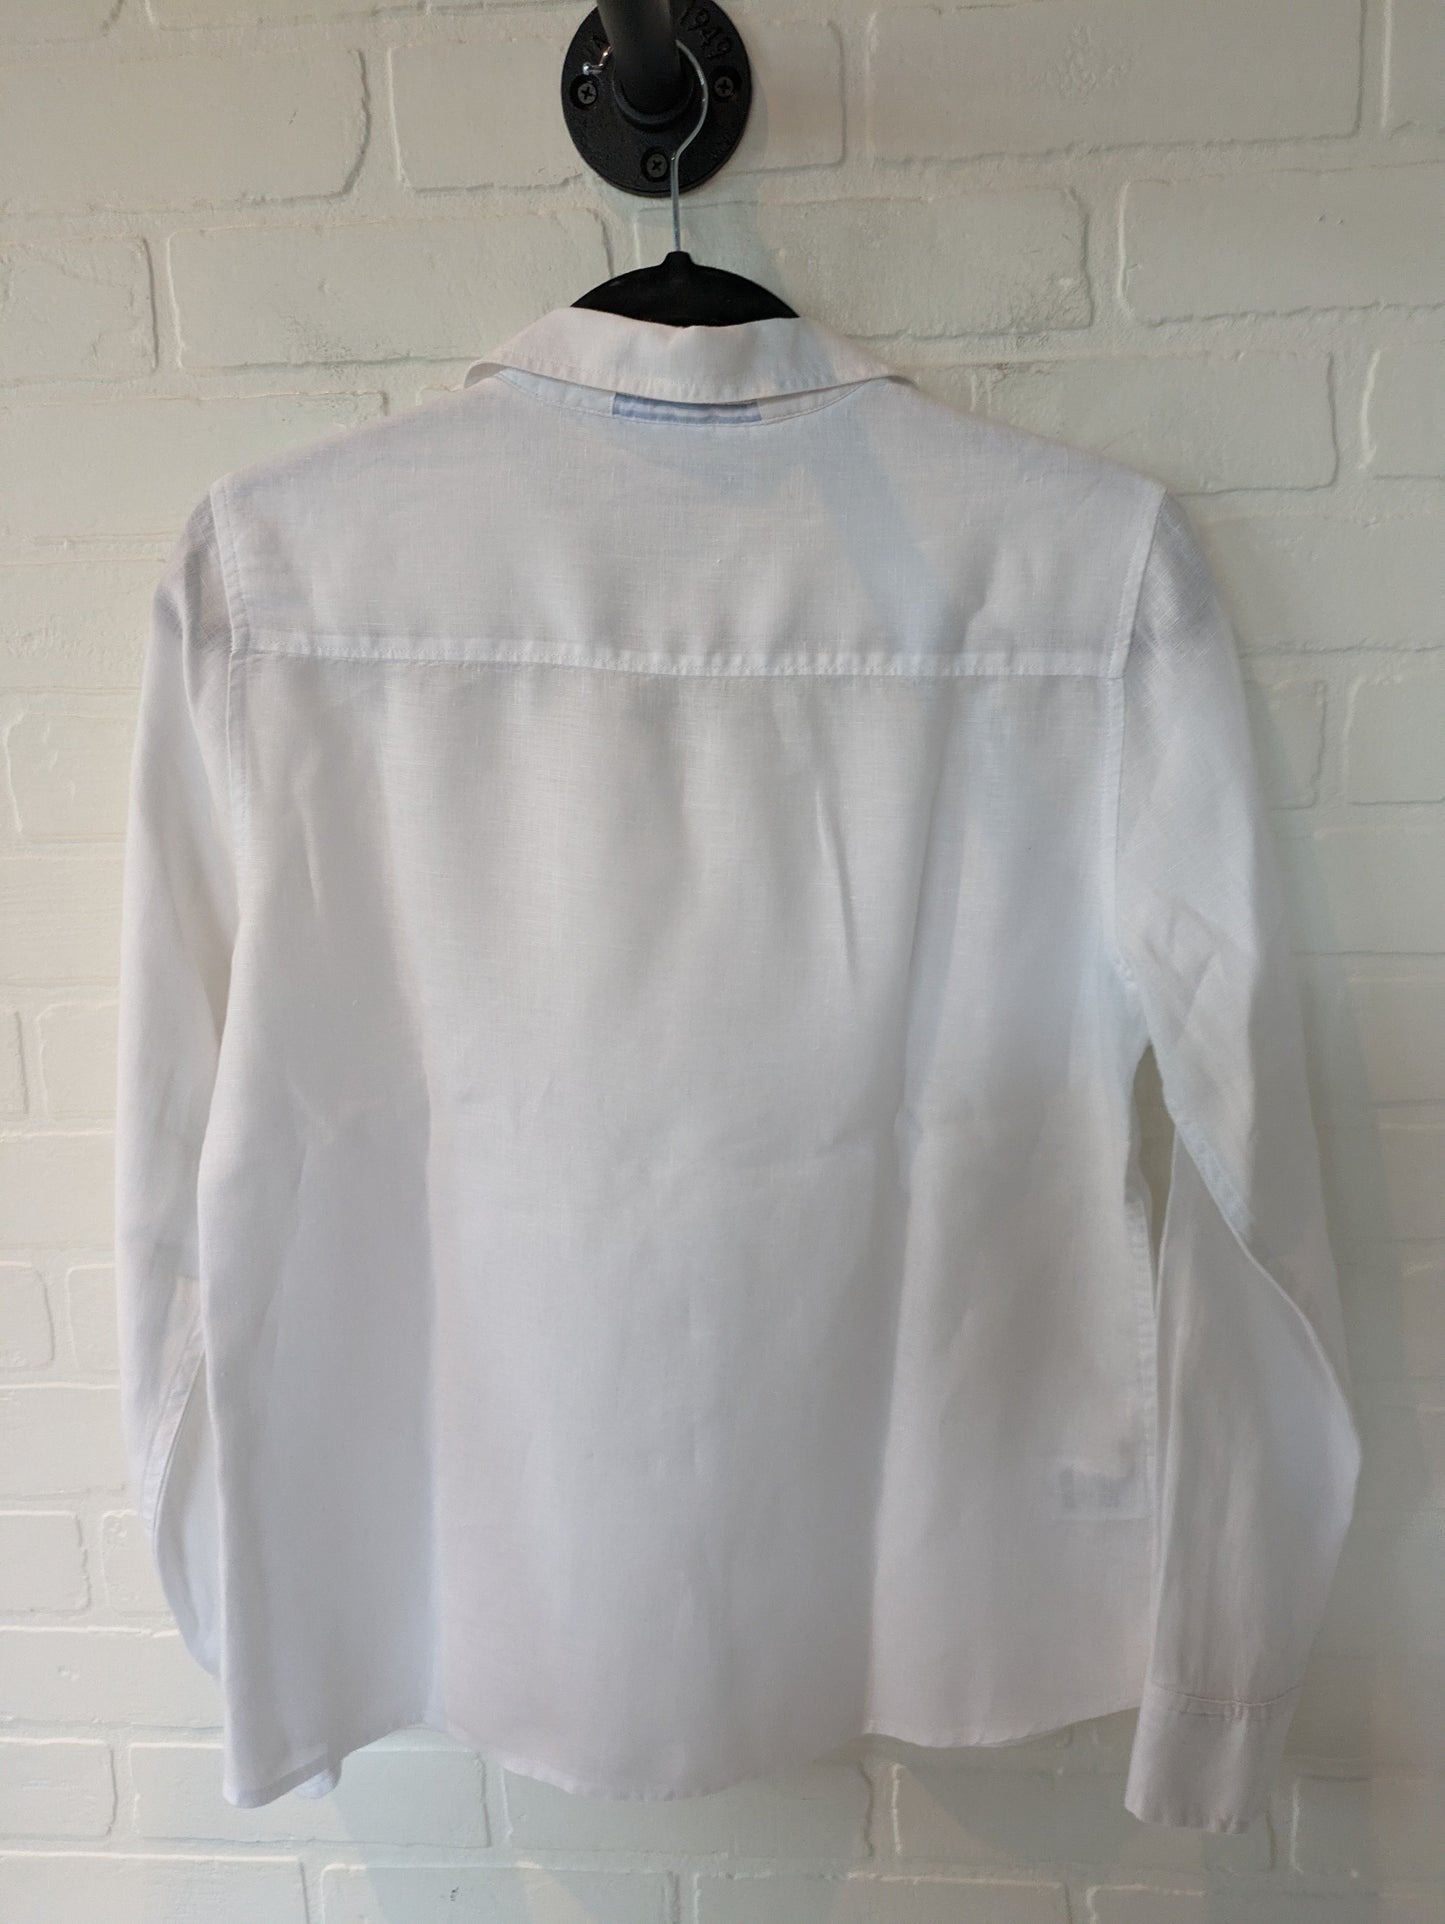 White Top Long Sleeve Tommy Bahama, Size Xs